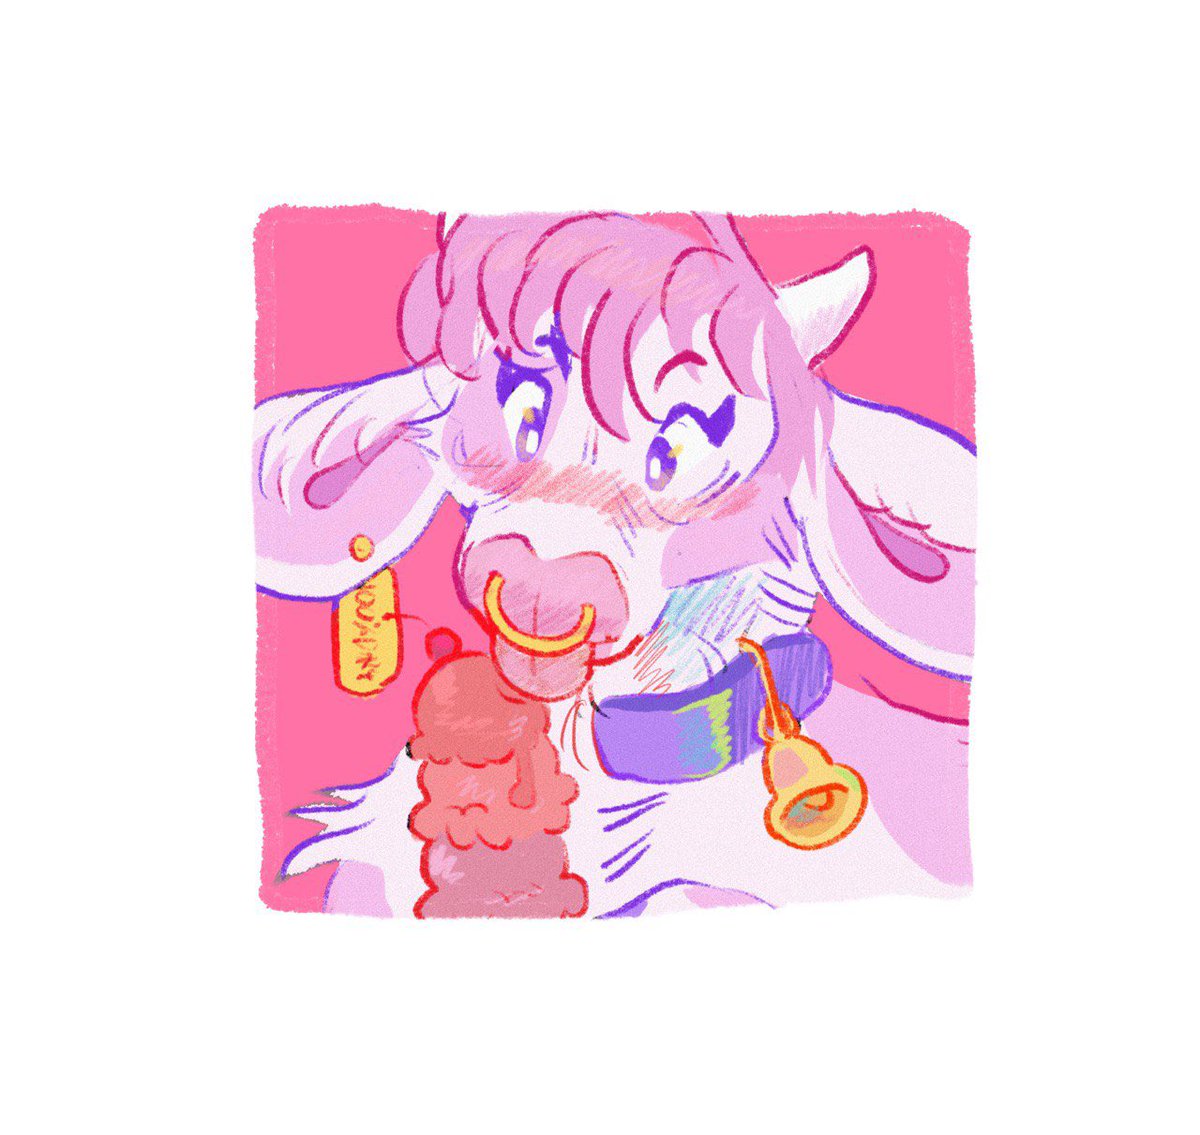 「 ICON RAFFLE Want a cute, colorful icon?」|✧ кя00вѕ ✧のイラスト